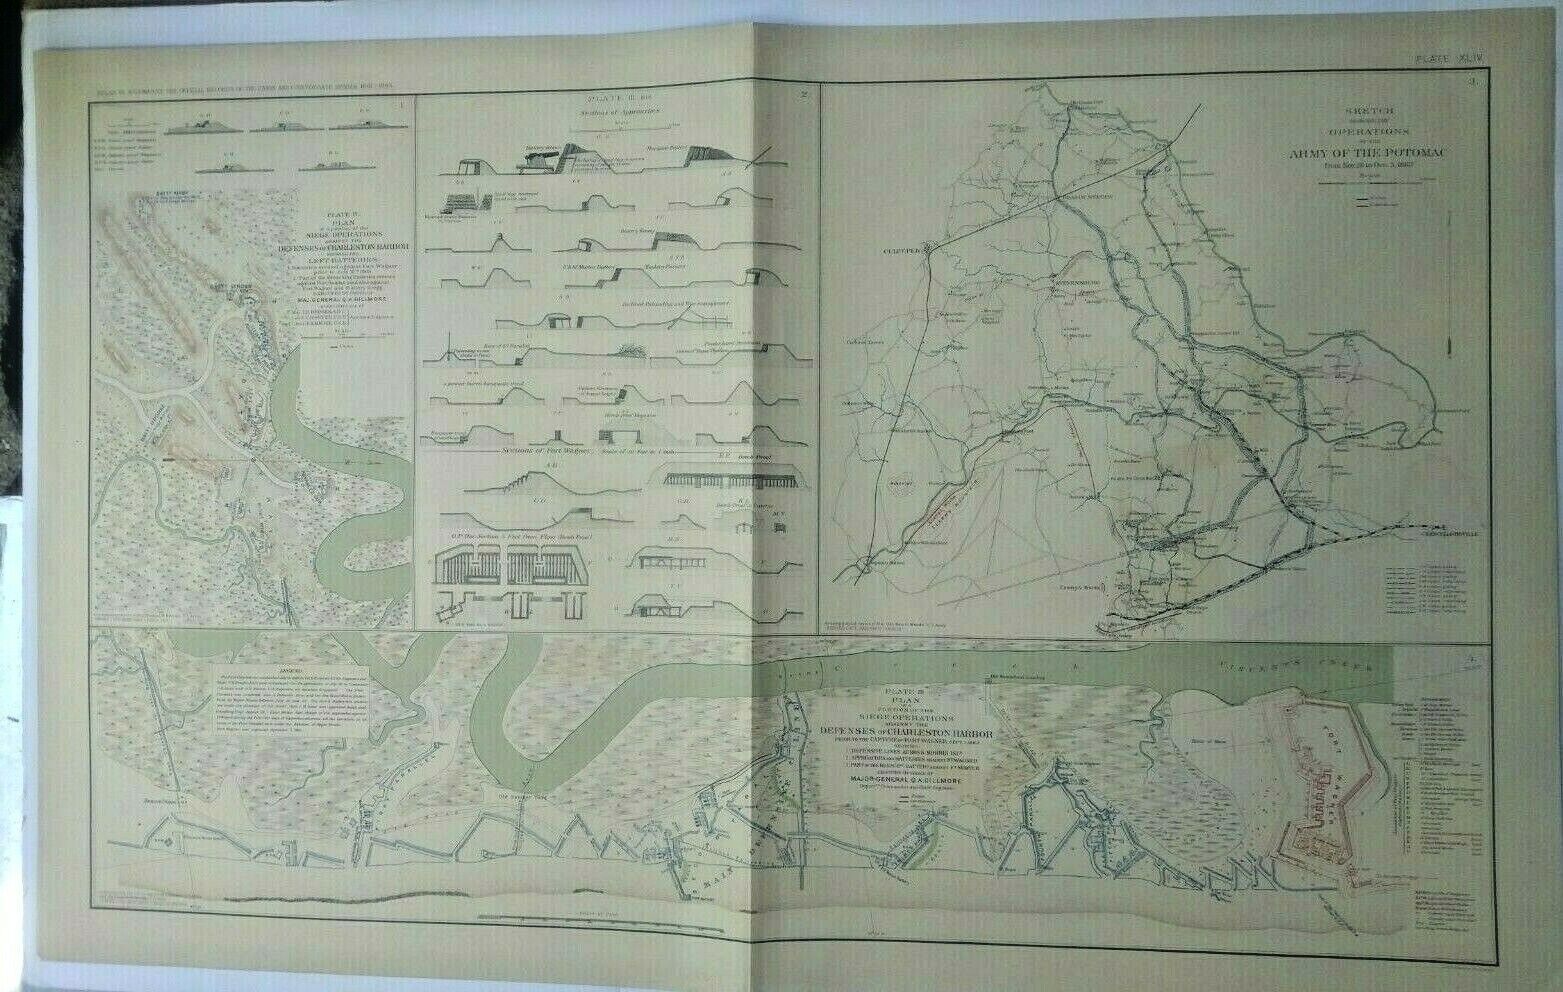 Civil War Map  Defenses of Charleston Harbor / Army of the Potomac - famous map